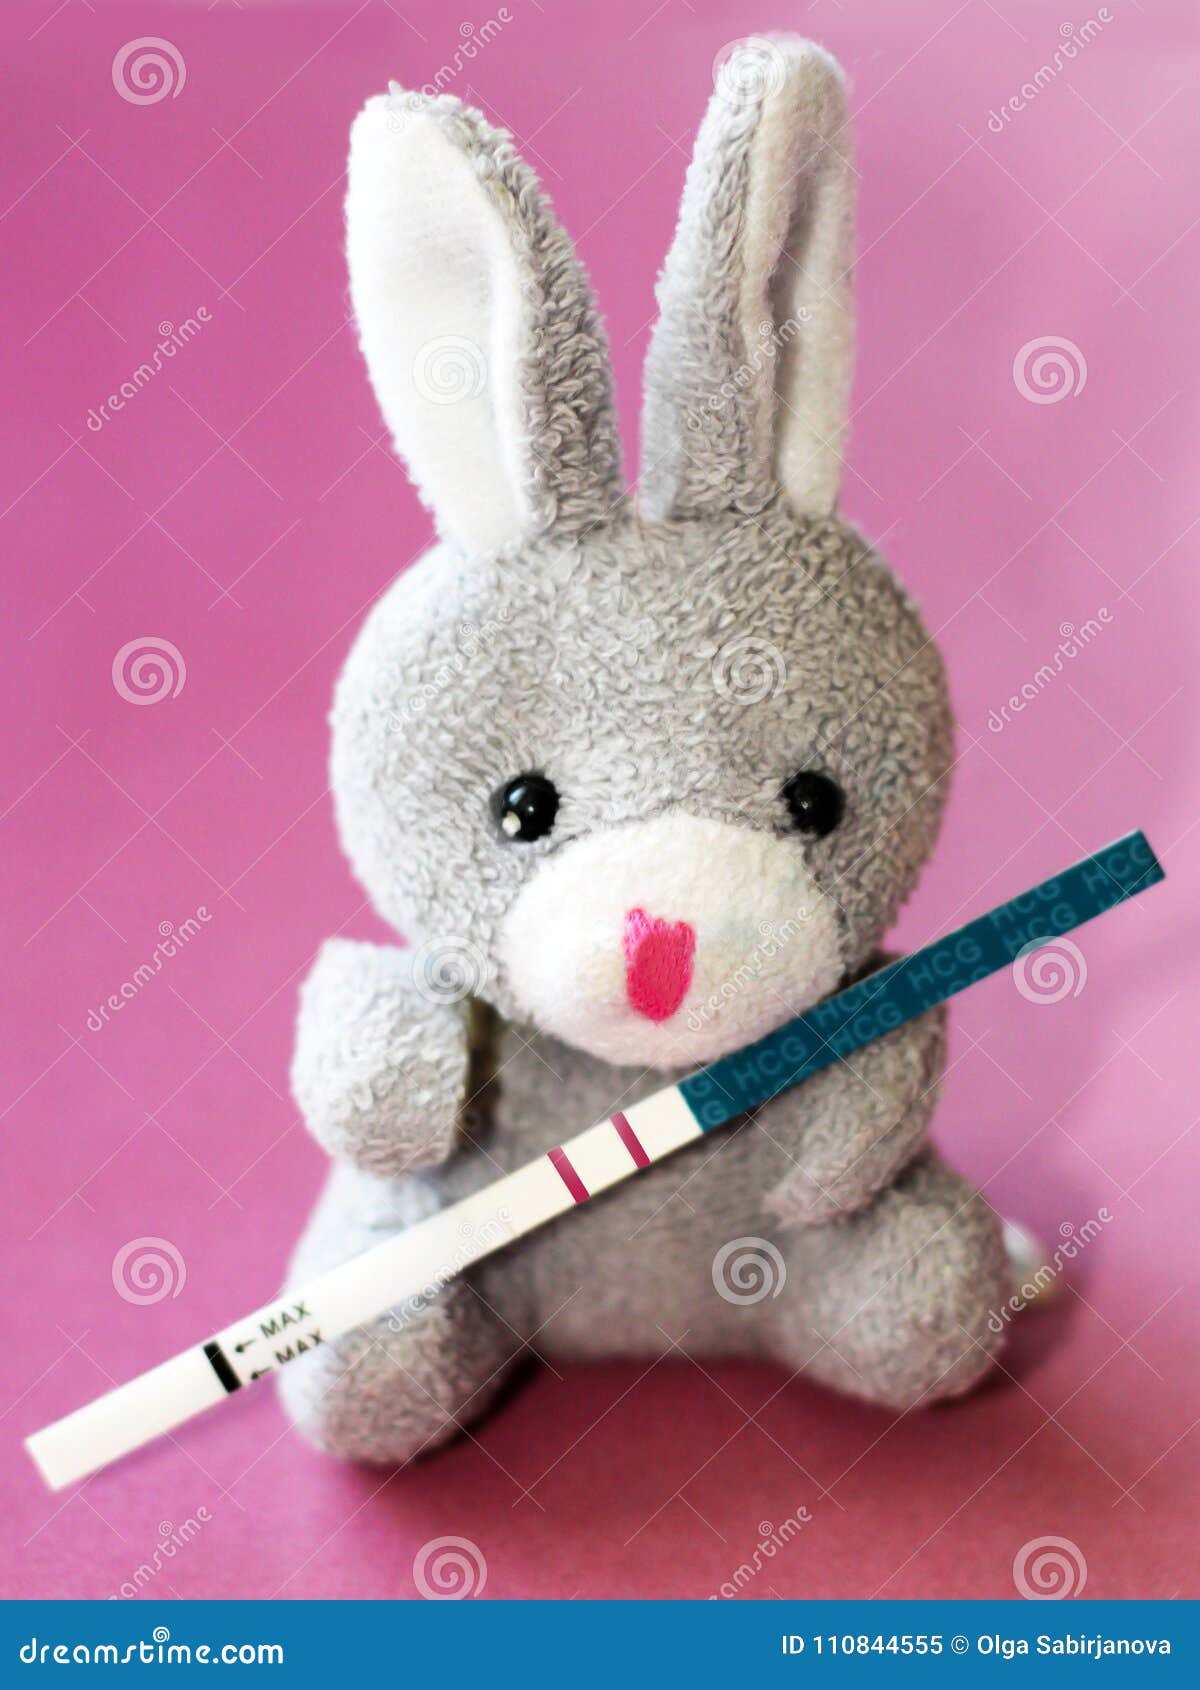 Pregnancy Test and Toy Rabbit Stock Image - Image of accessories